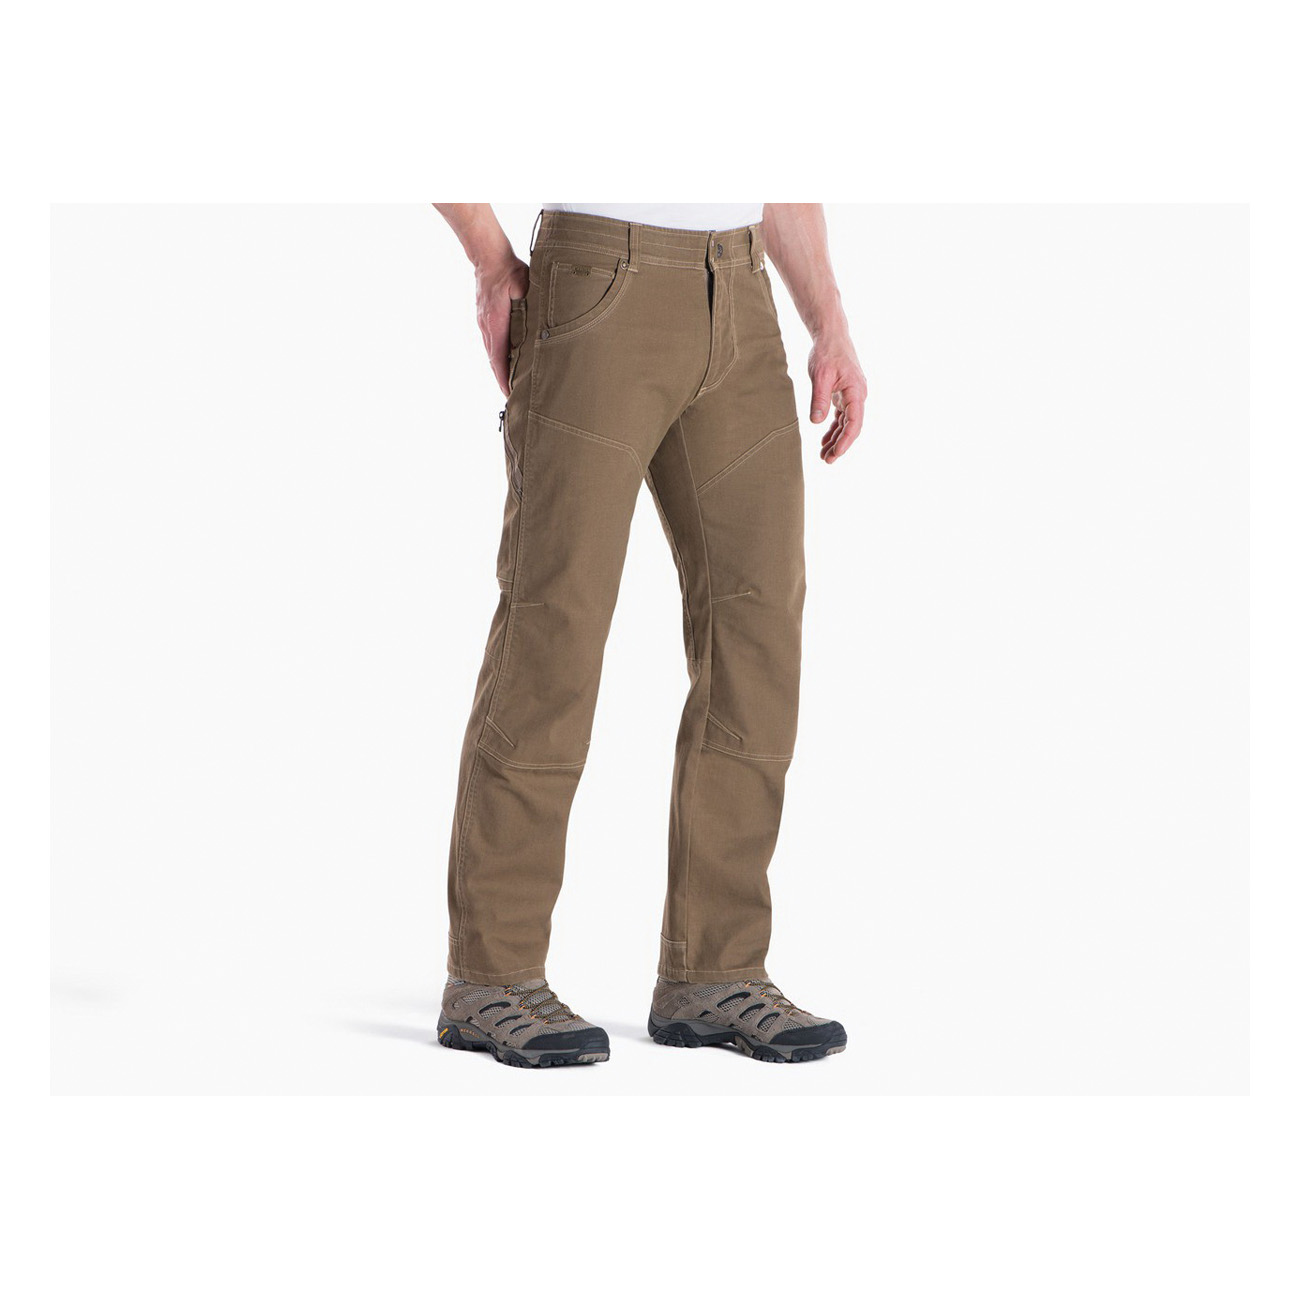 Kuhl THE LAW Series 5117-DKK-33X30 Pants, M, 33 in, 30 in